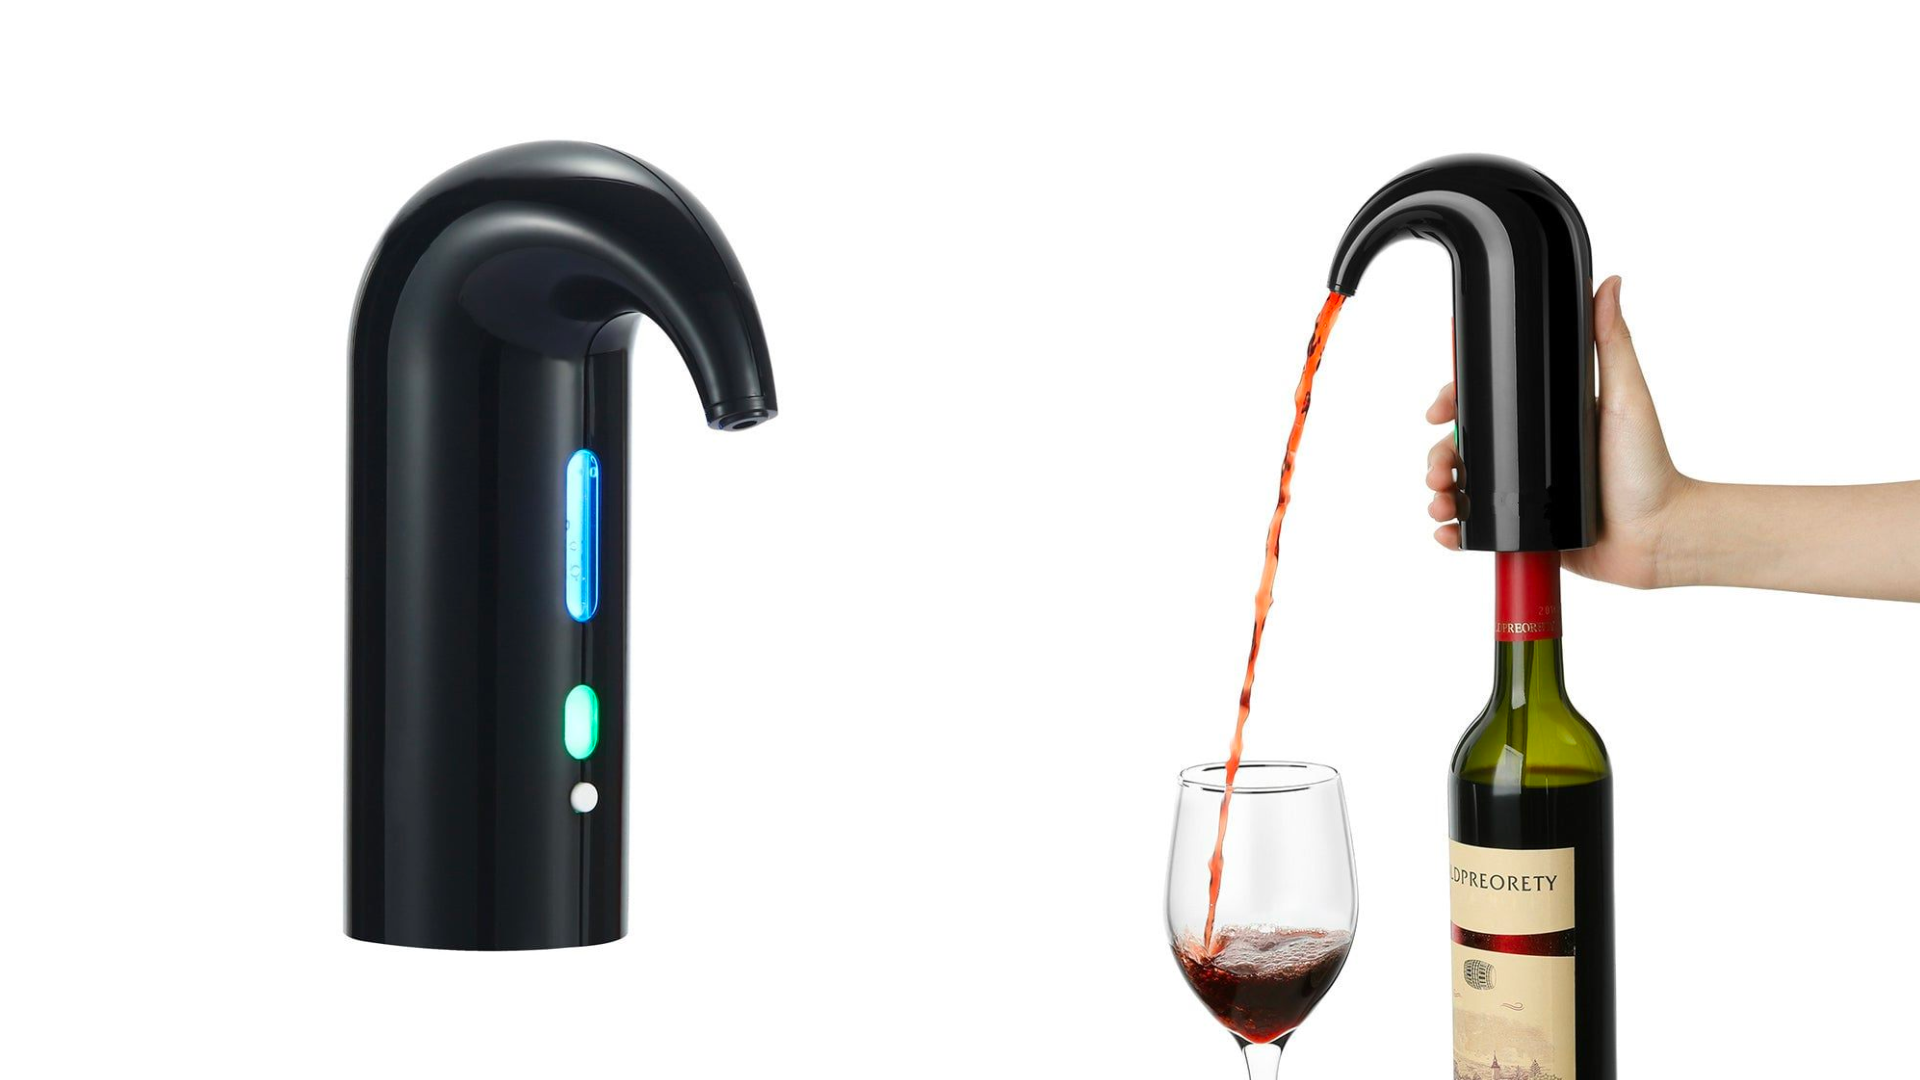 Black curved aerator wine dispenser product. To the right, we see the aerator on top of a wine bottle, dispensing red wine into a wine glass.Black curved aerator wine dispenser product. To the right, we see the aerator on top of a wine bottle, dispensing red wine into a wine glass.